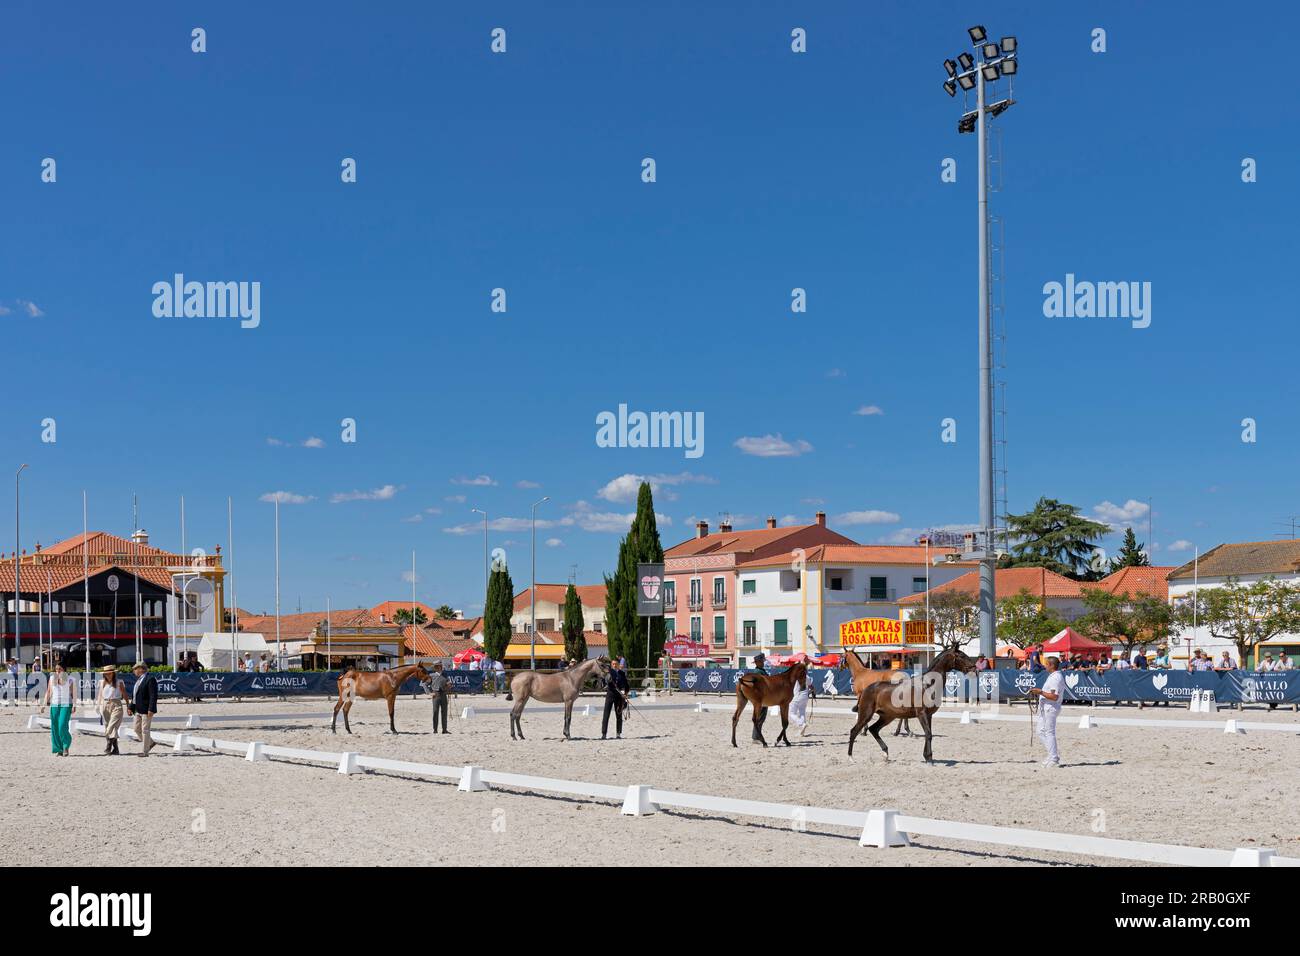 Europe, Portugal, Alentejo Region, Golega 'Mares and Foals' Horse Festival with Young Lusitano Horses lined up to receive Winner's Rosettes Stock Photo